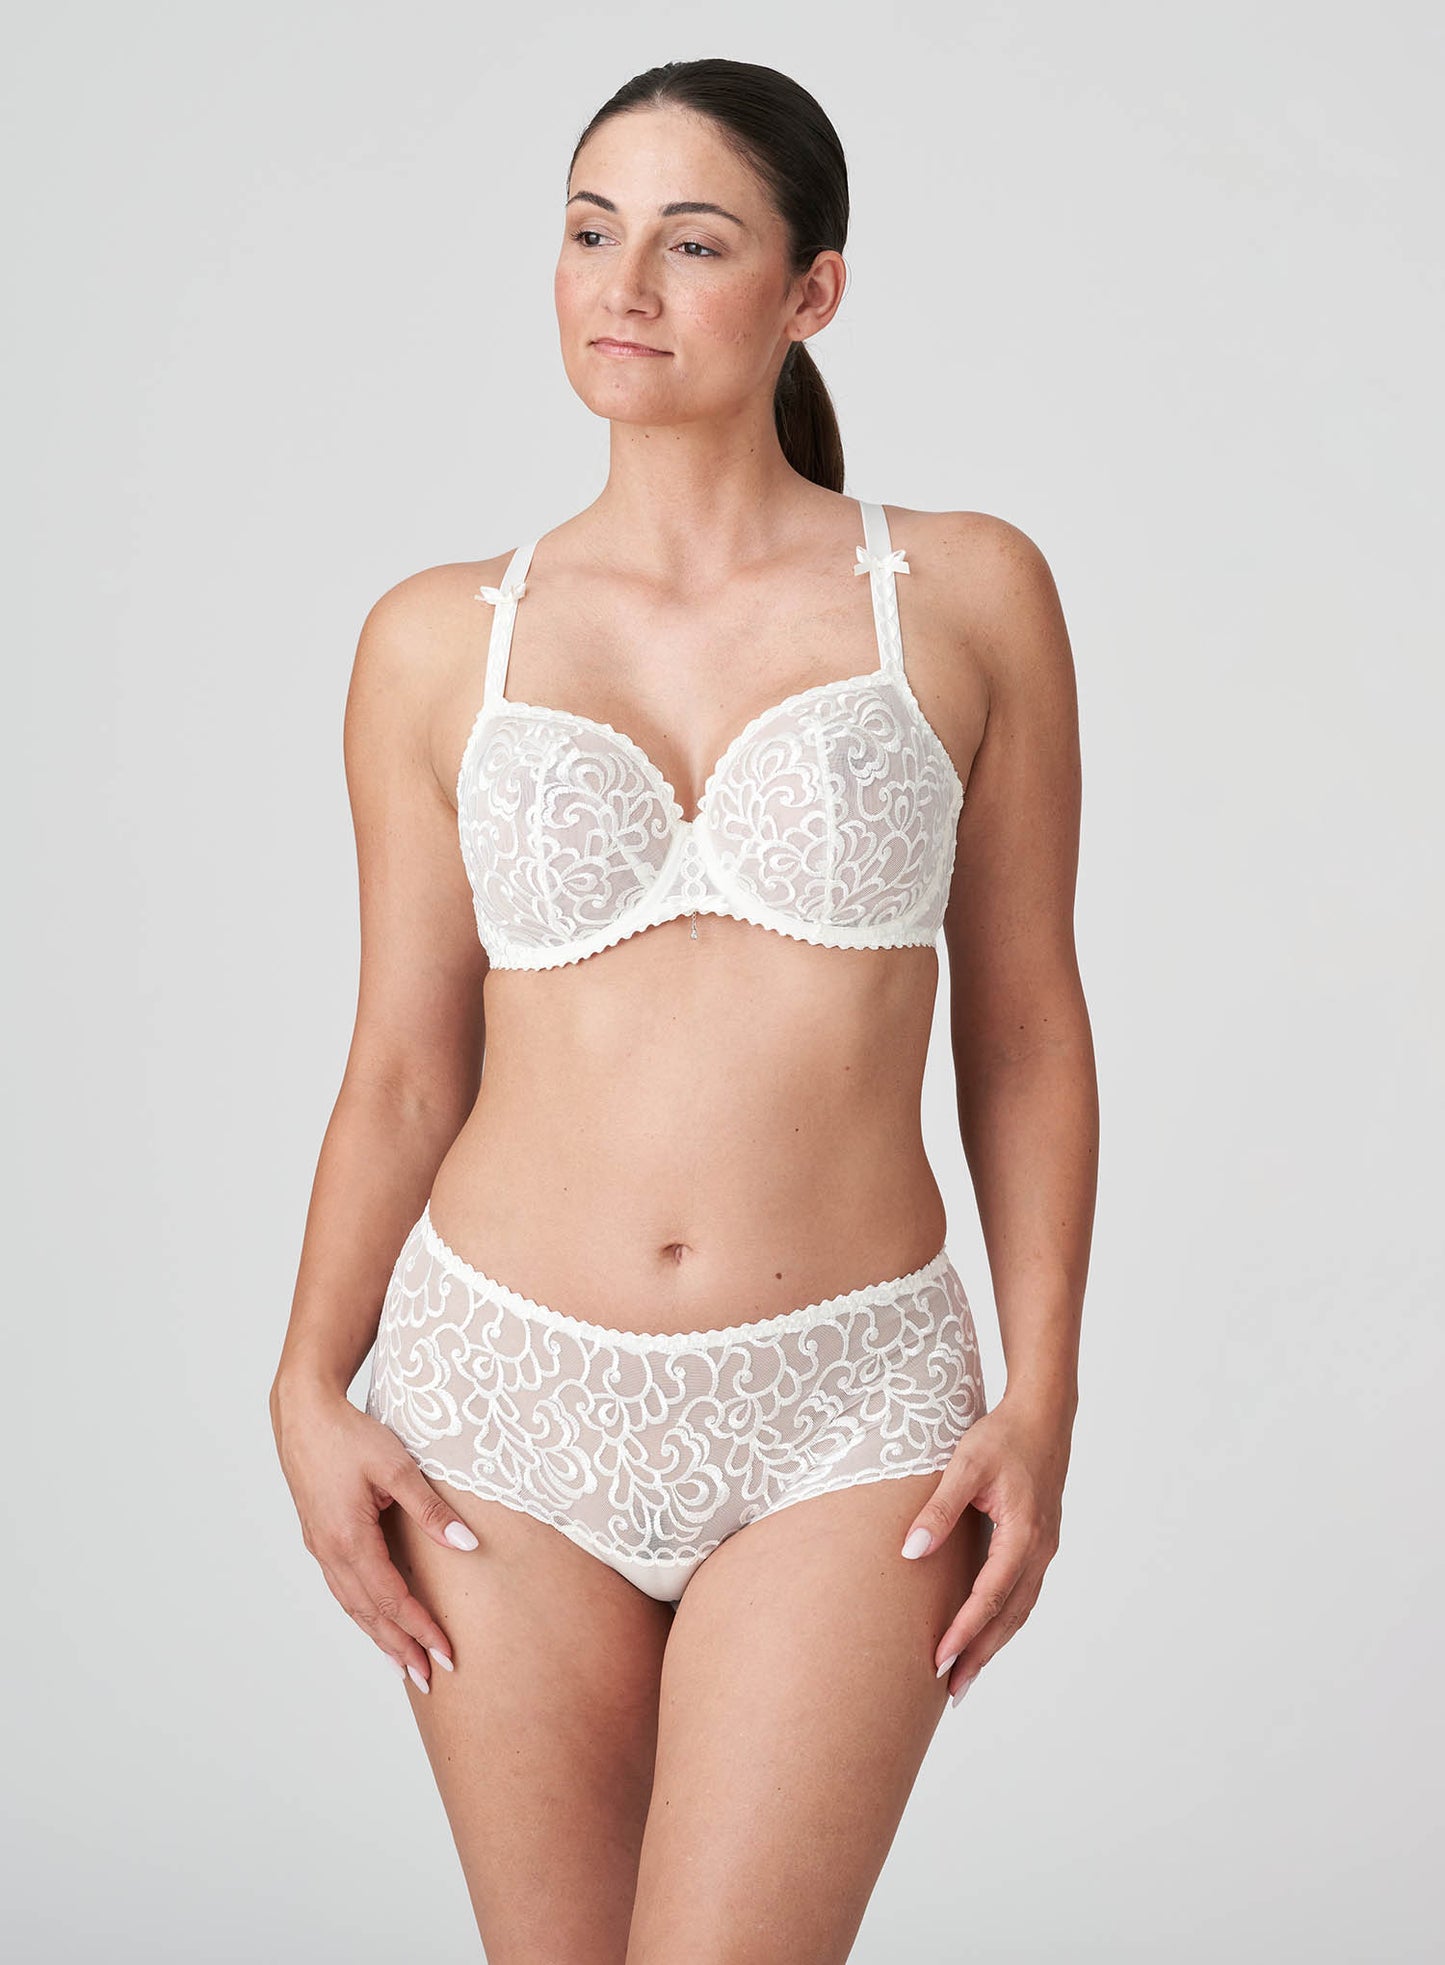 Buy Cotton On Body Cassie Lace Tanga G String Brief Online